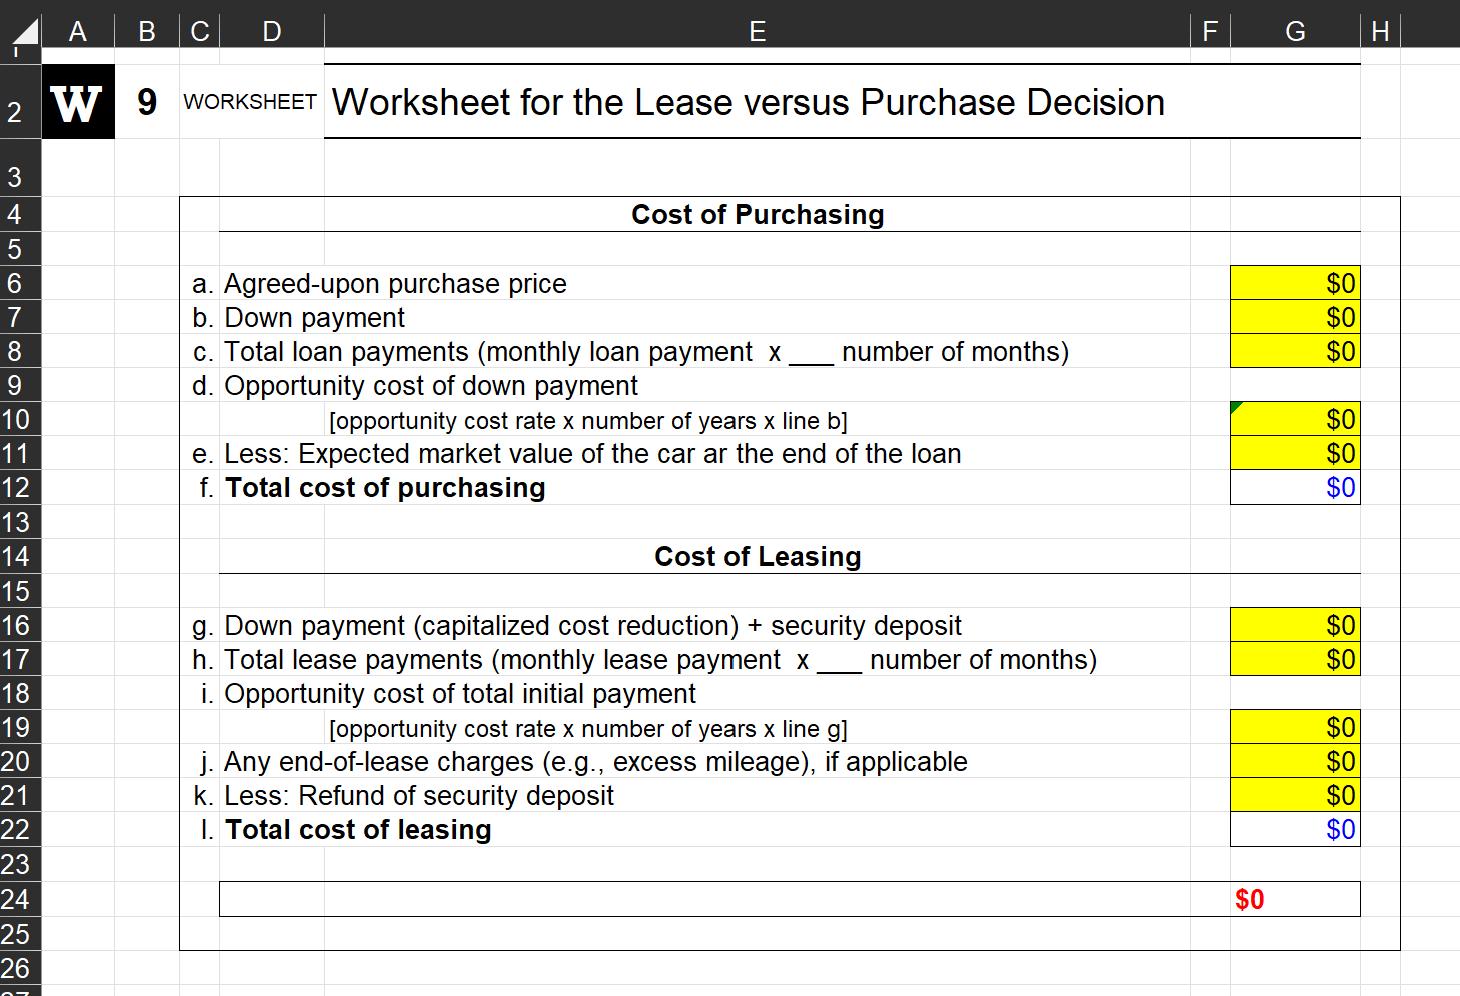 A B C 2 W 9 WORKSHEET Worksheet for the Lease versus Purchase Decision 3 4 5 6 7 8 9 10 11 12 13 14 15 16 17